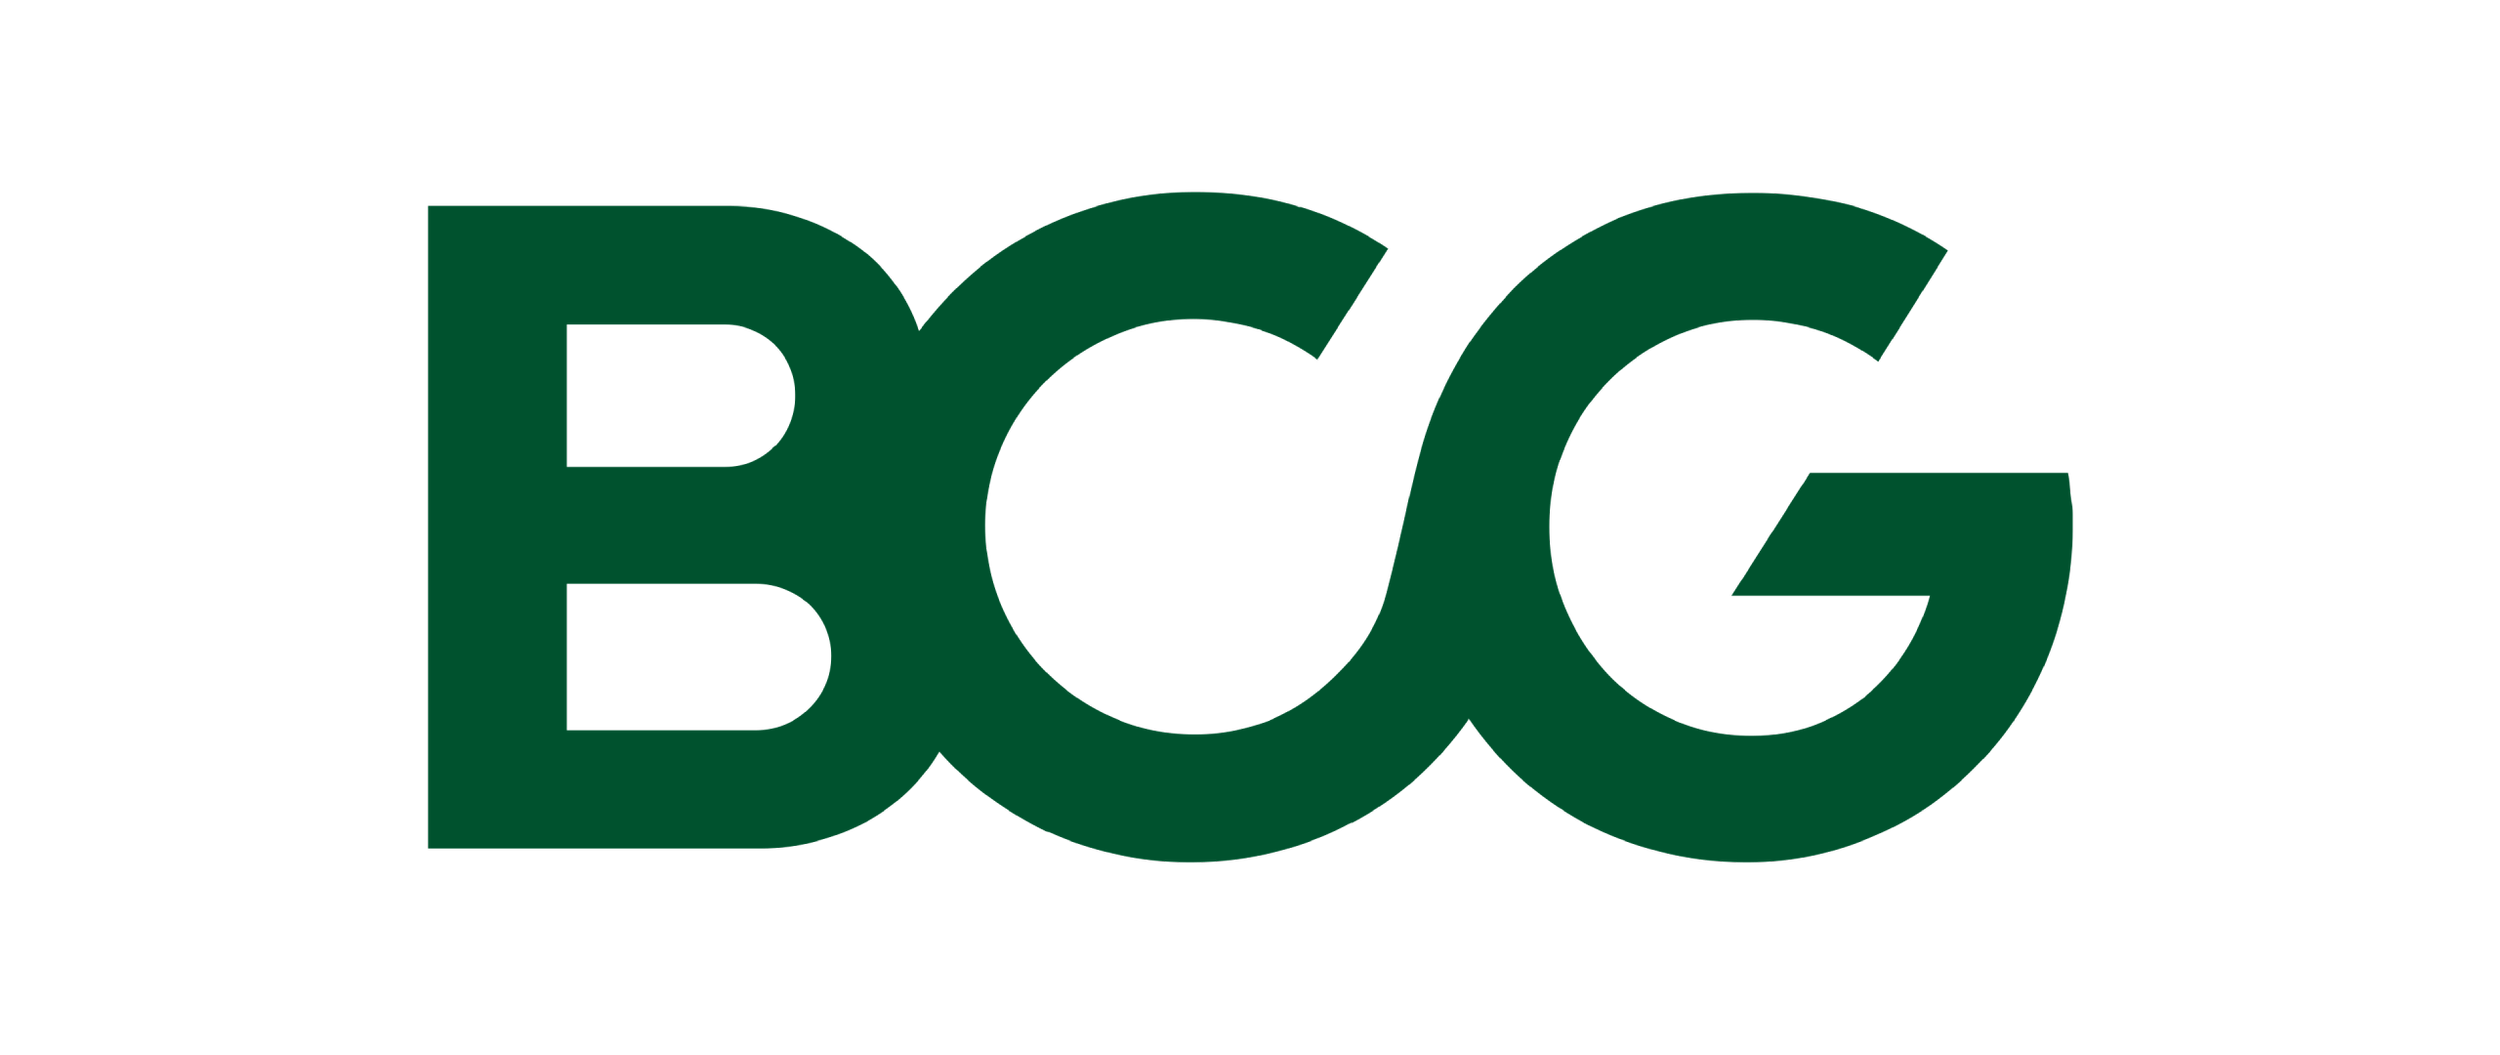 bcg.png